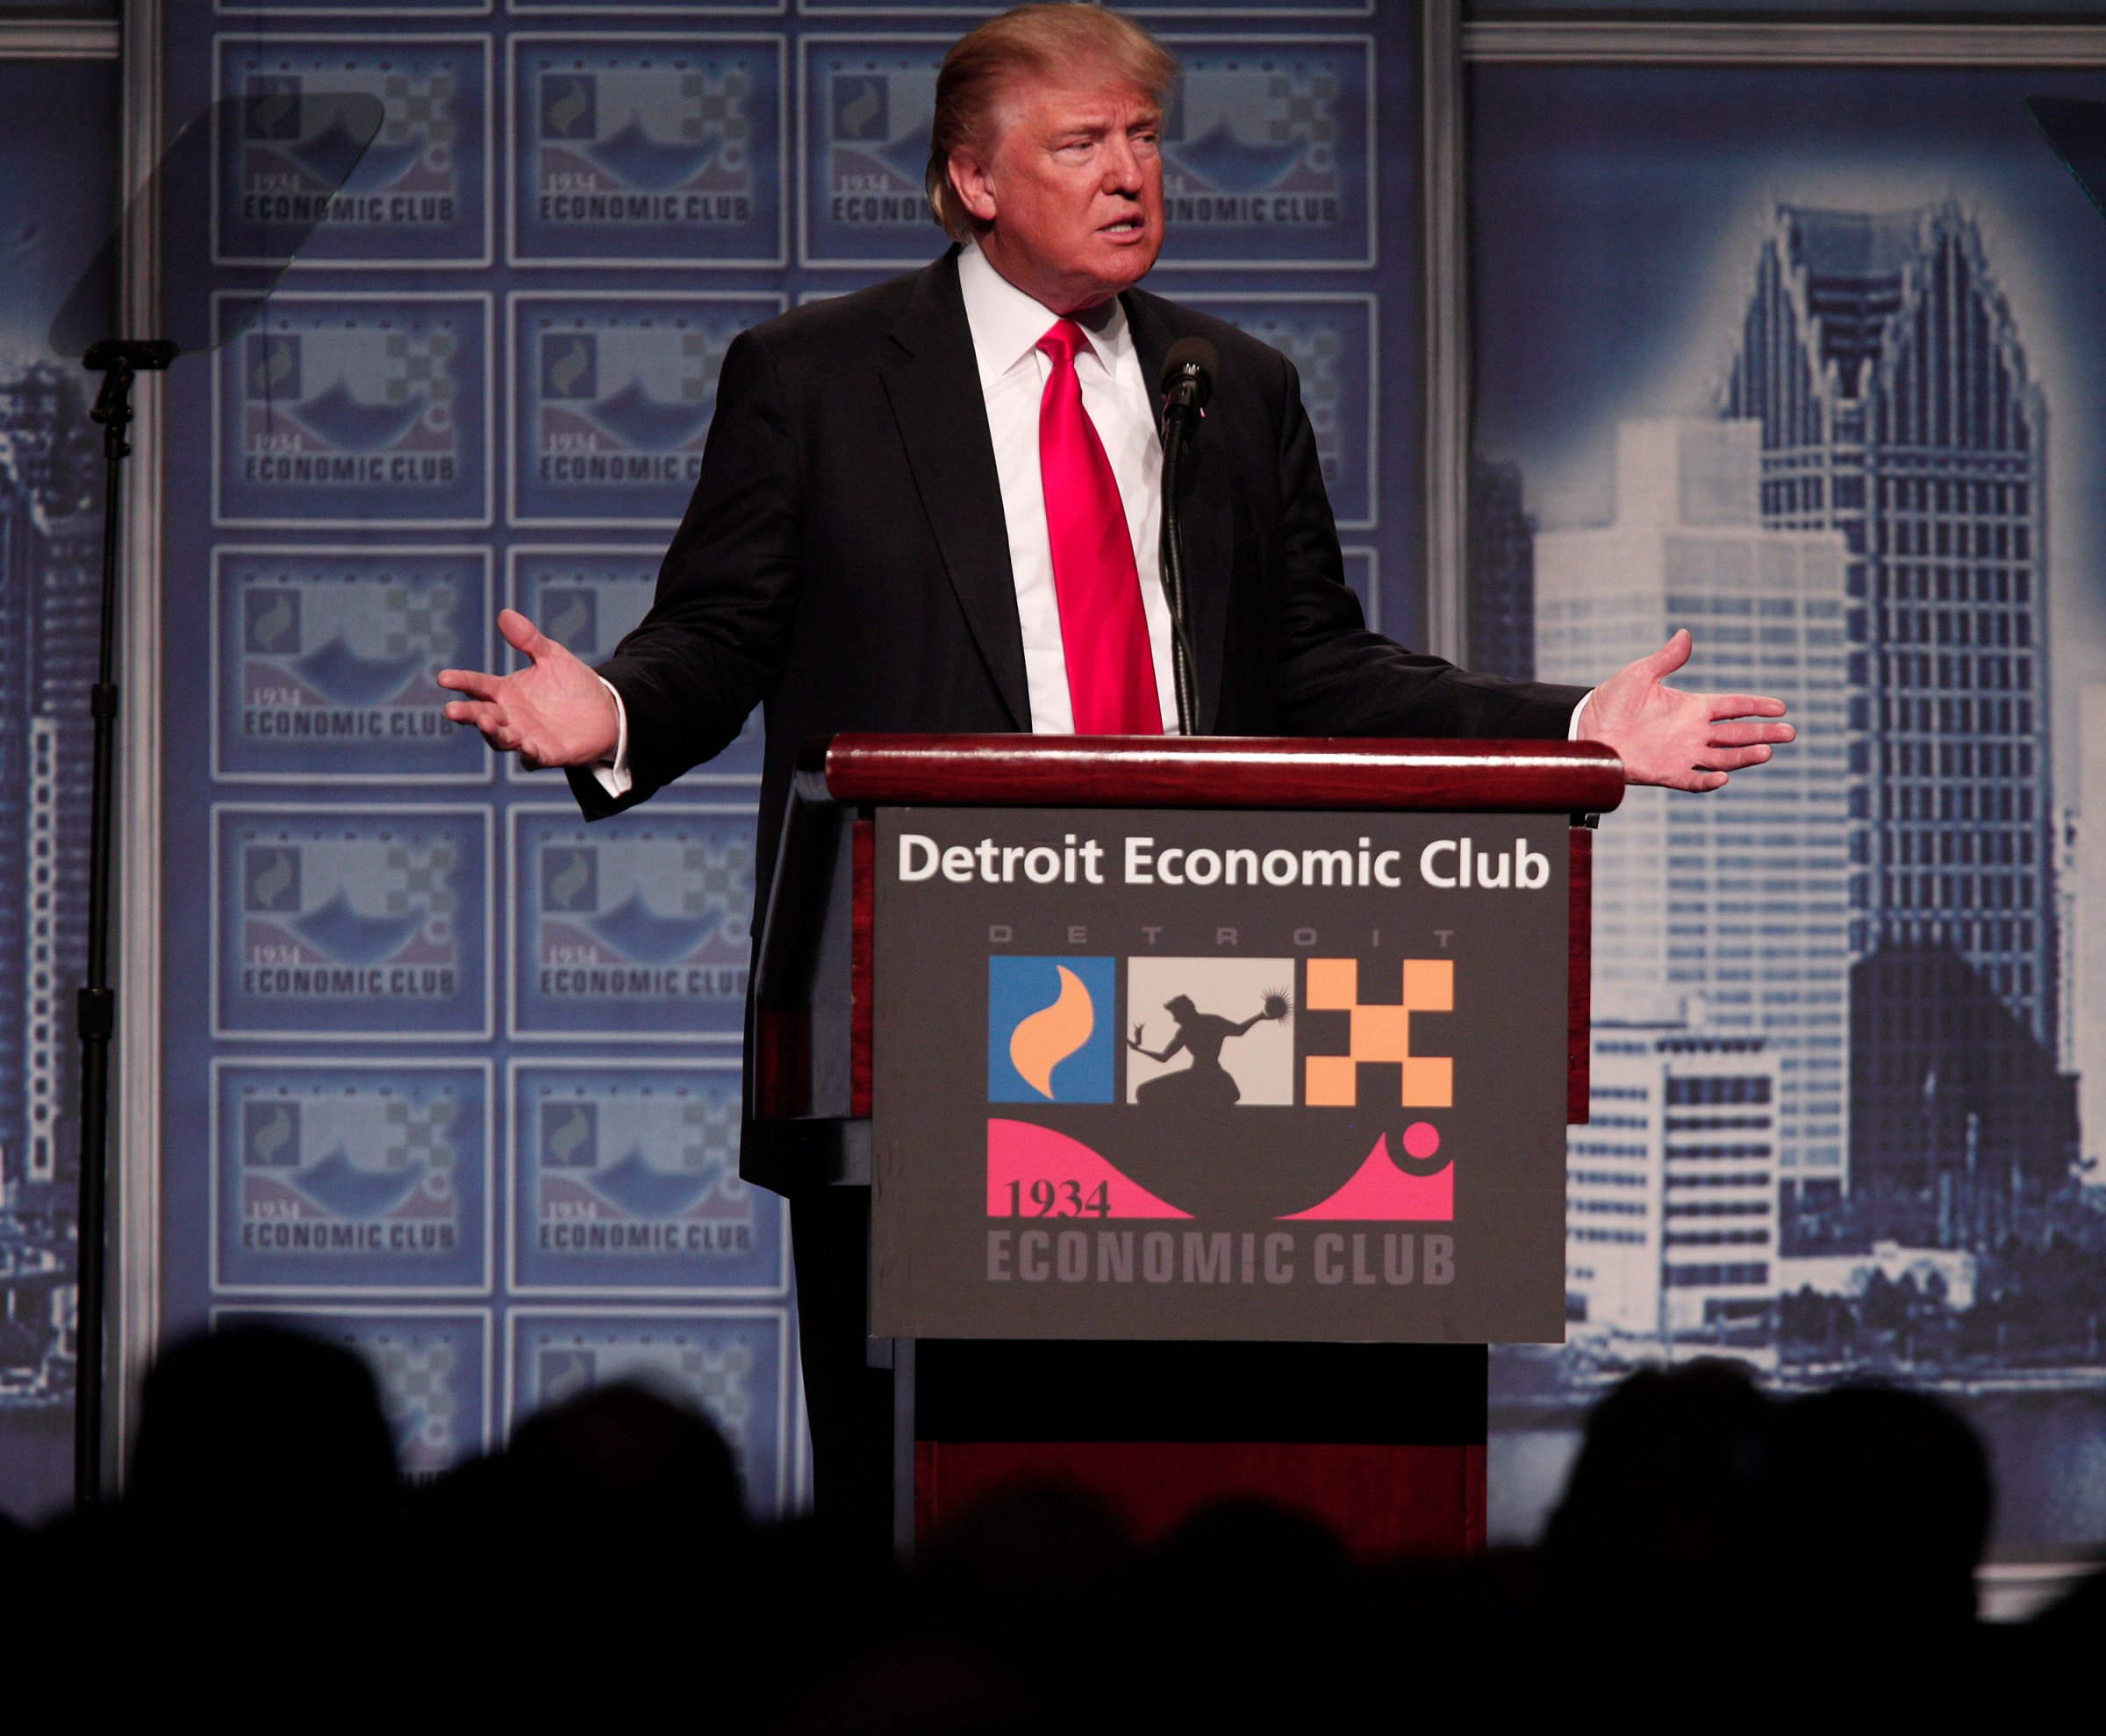 Republican presidential candidate Donald Trump delivers an economic policy address detailing his economic plan at the Detroit Economic Club in Detroit on Aug. 8, 2016.